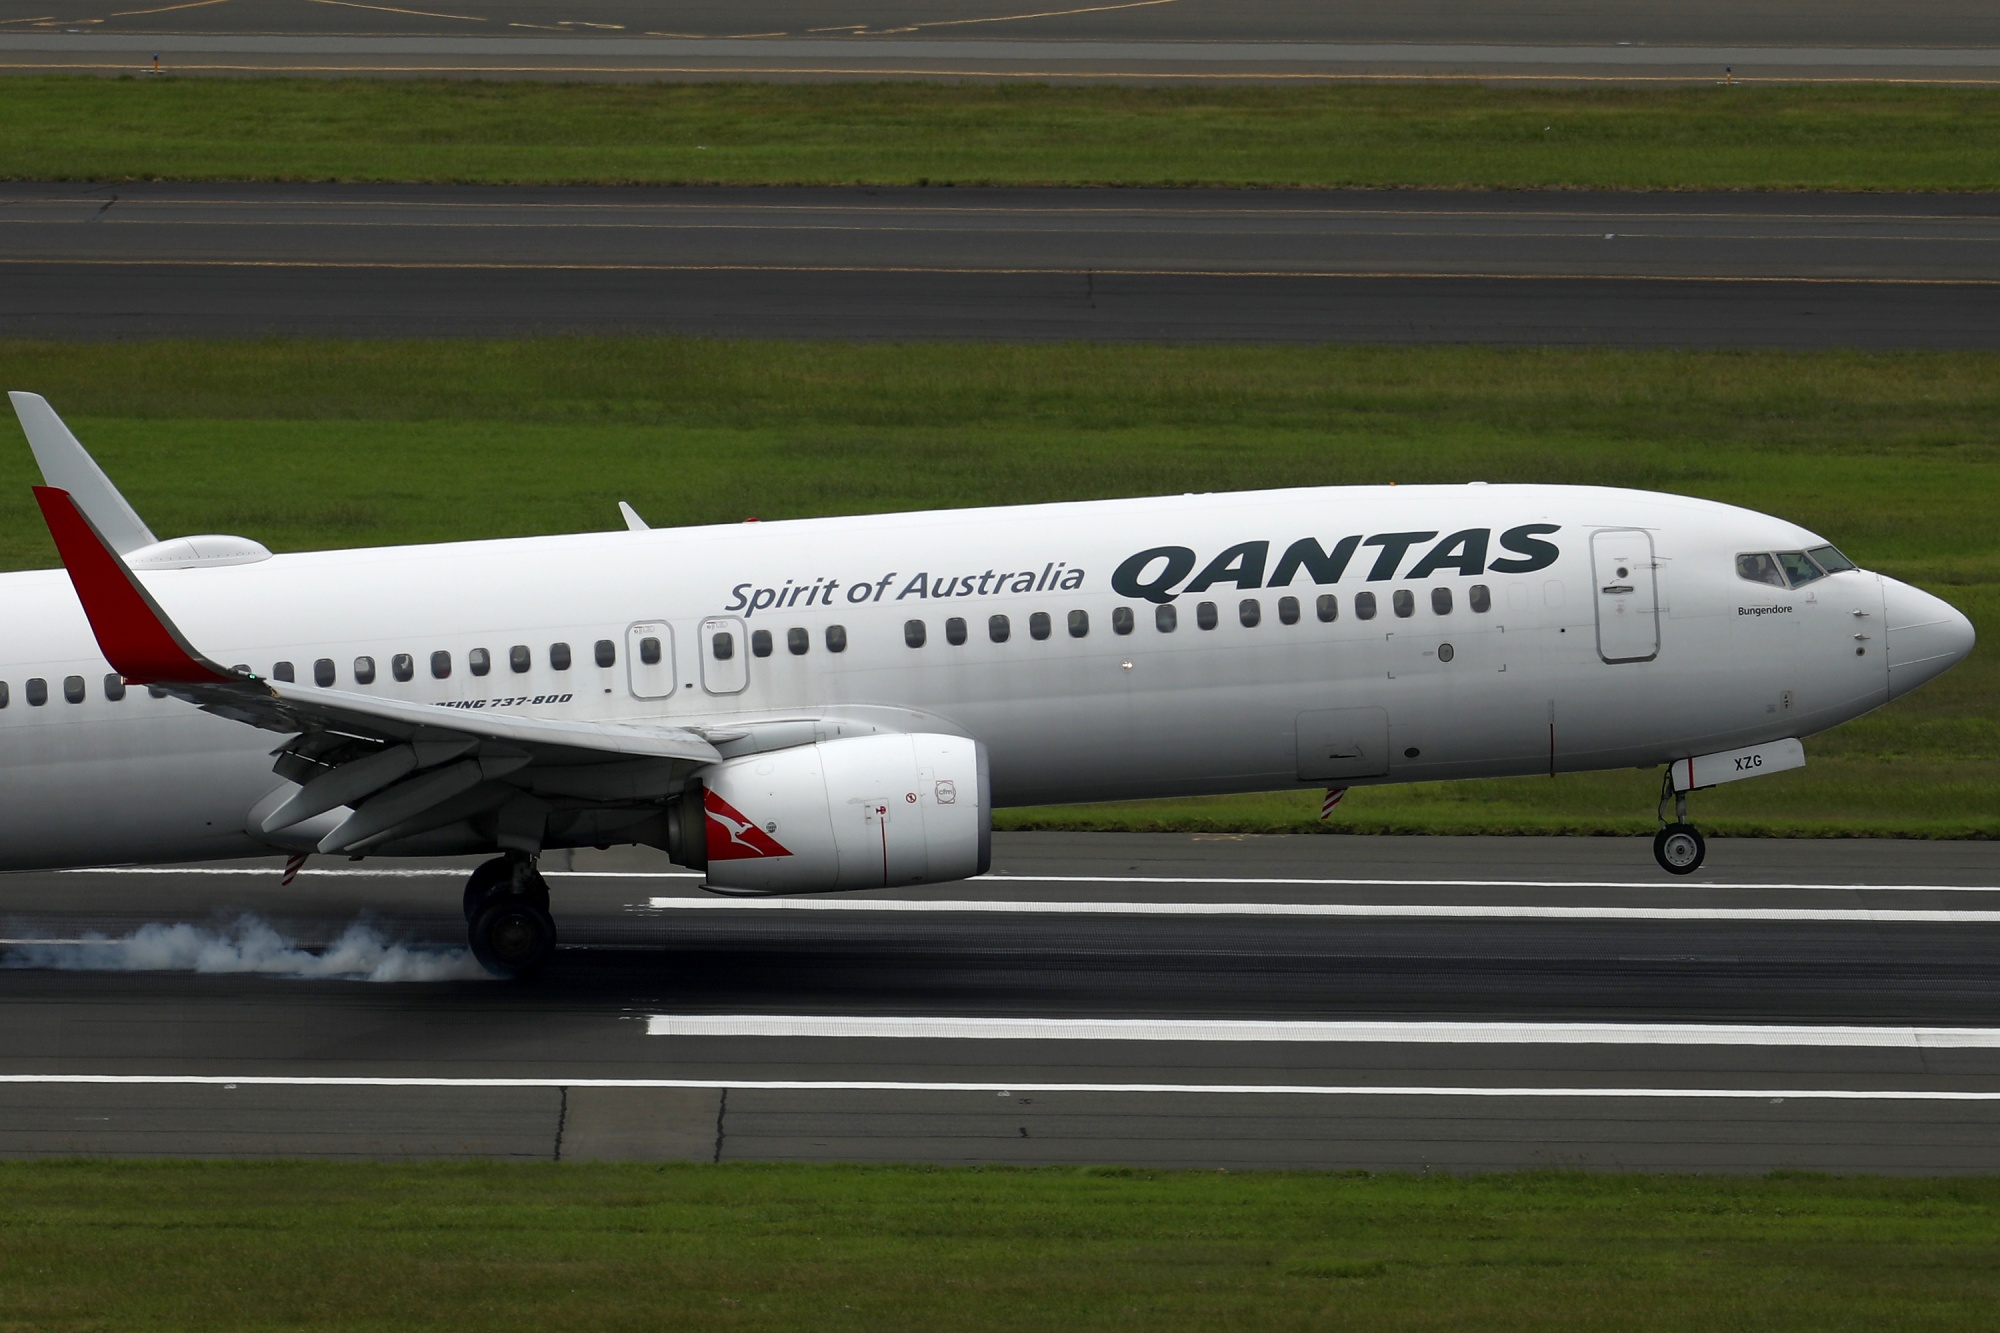 Operations at Sydney Airport Ahead of Qantas and the Airport's Earnings